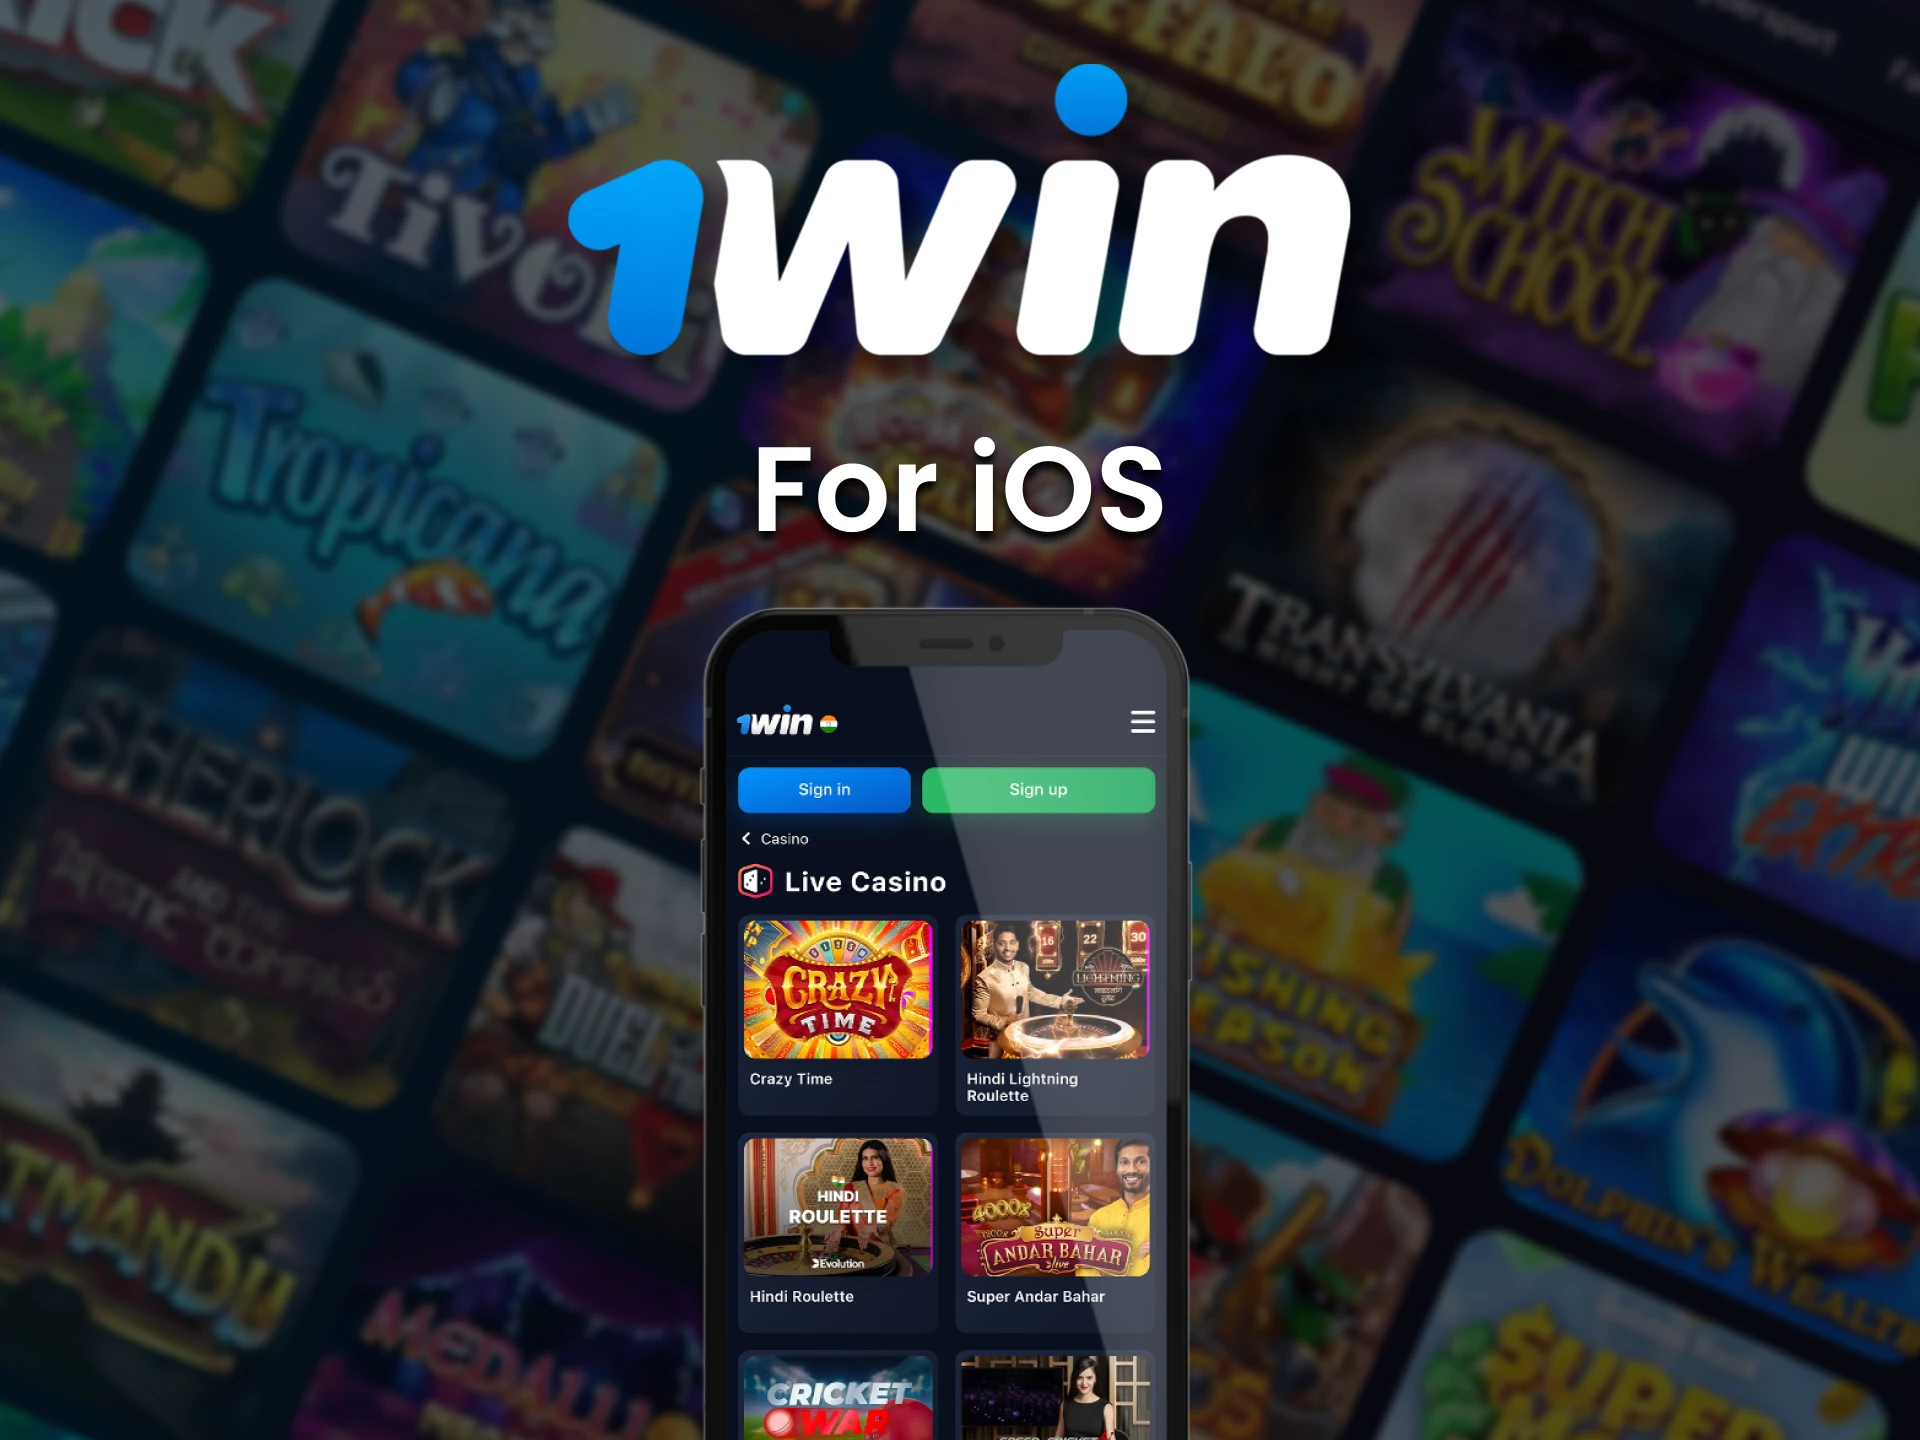 You can play at 1win casino through the iOS app.